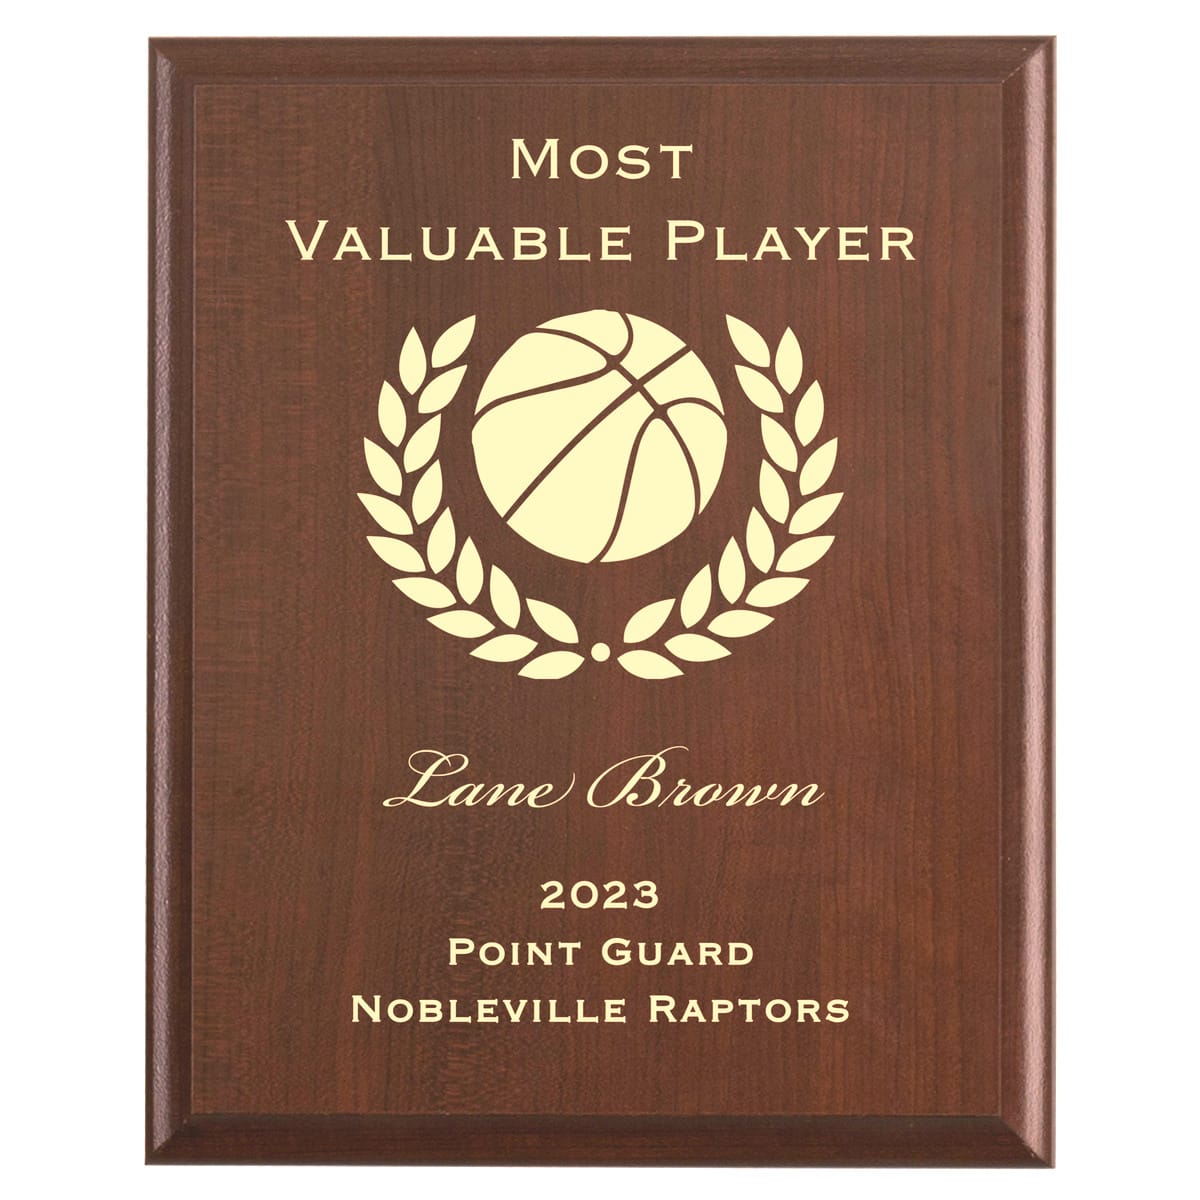 Plaque photo: Basketball MVP Award design with free personalization. Wood style finish with customized text.